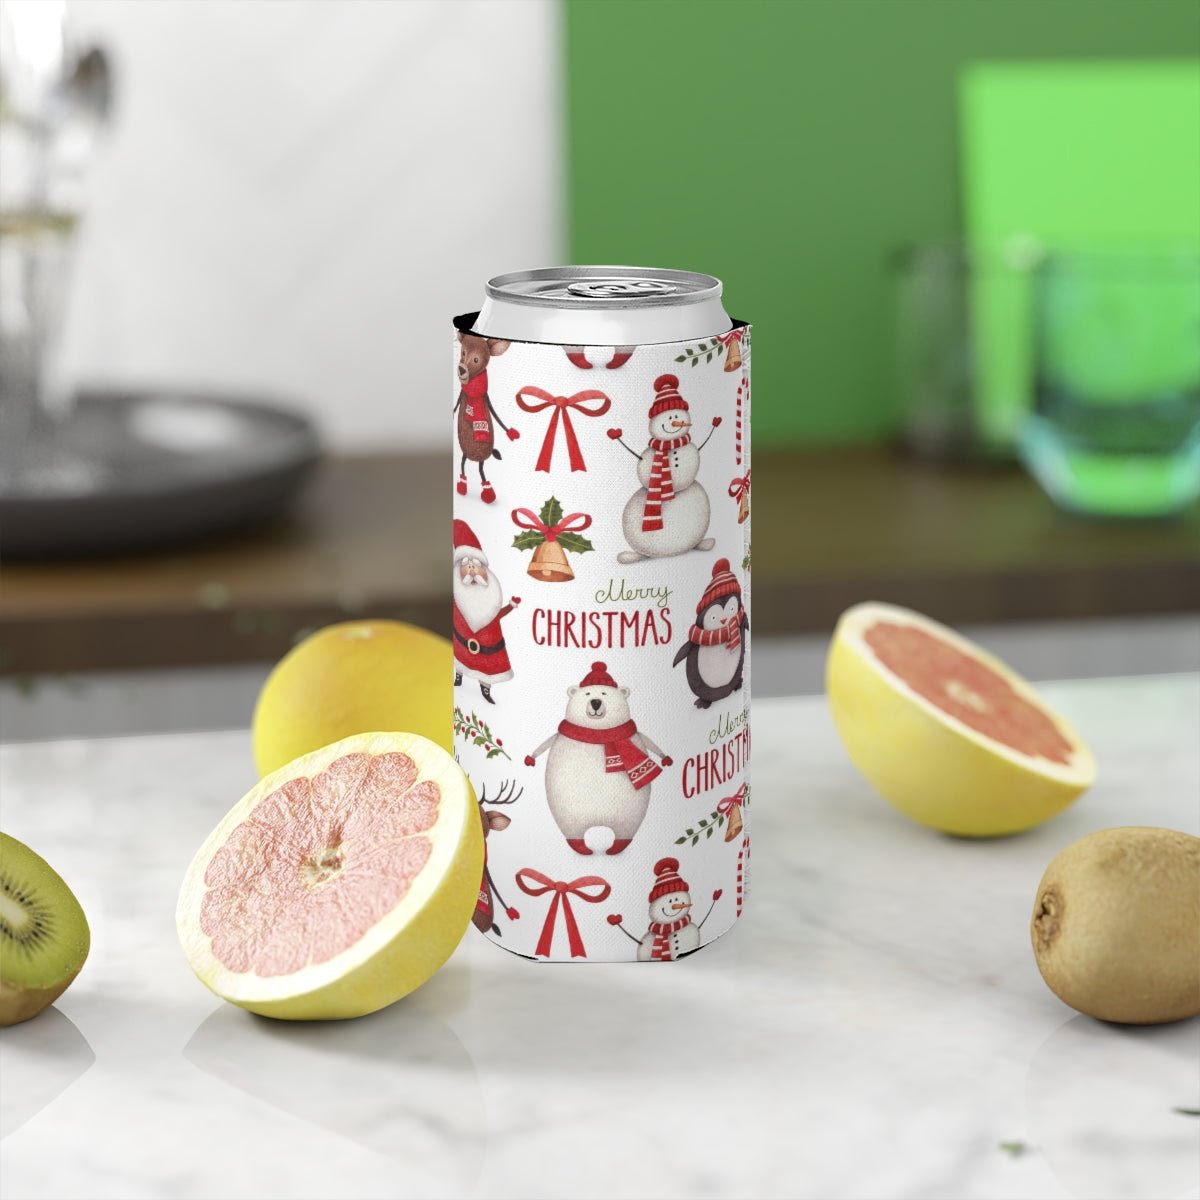 Christmas Santa Slim Can Cooler - Puffin Lime